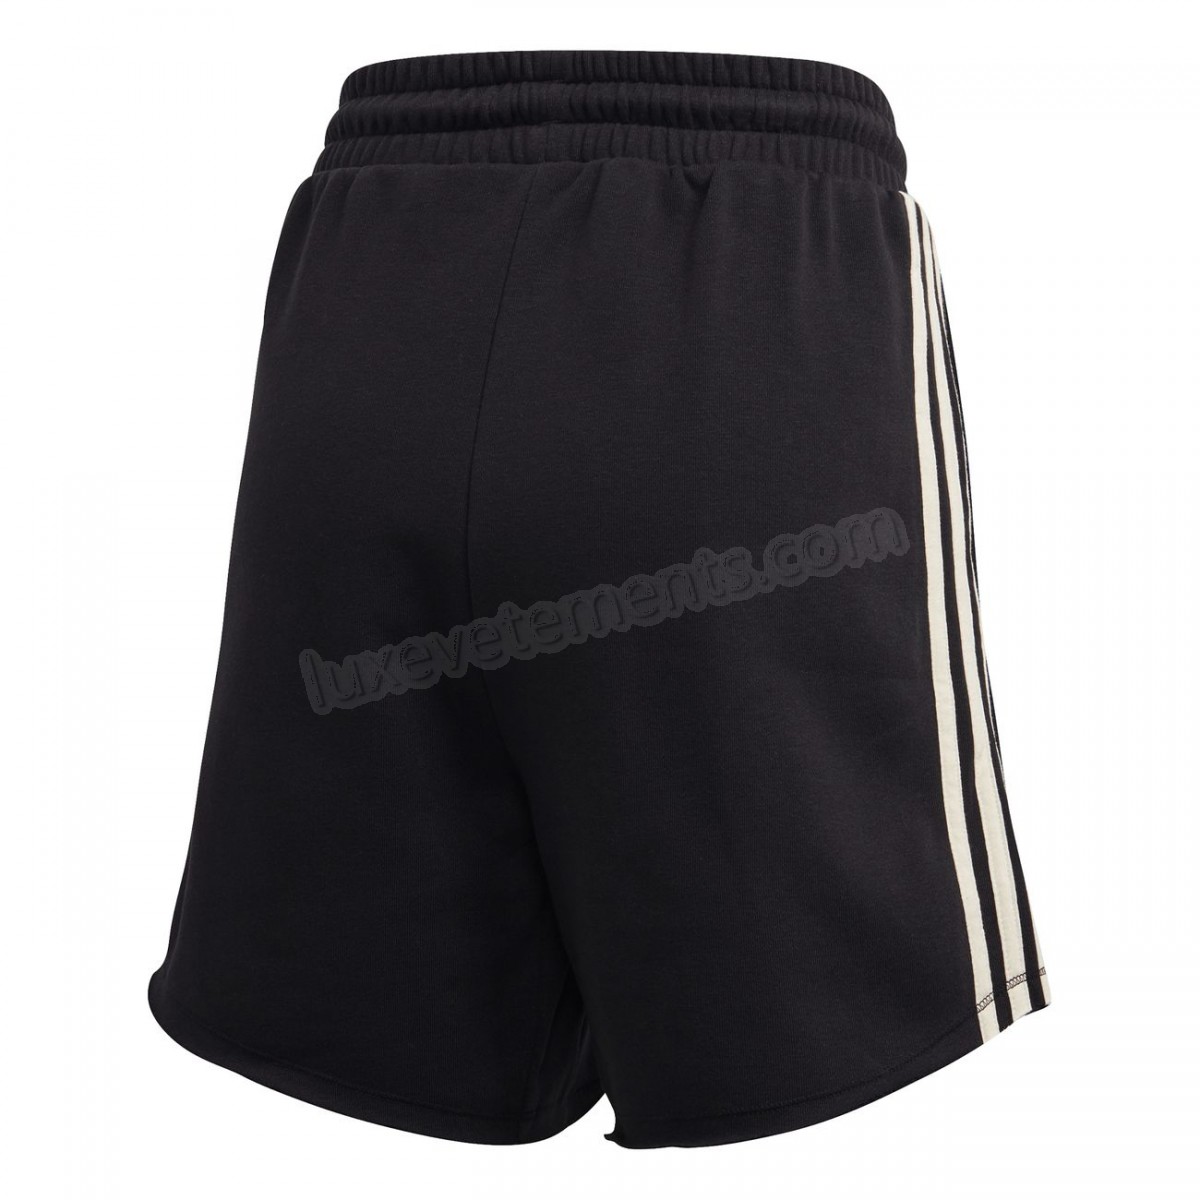 Adidas-Fitness femme ADIDAS Short femme adidas Must Haves Recycled Cotton Vente en ligne - -6